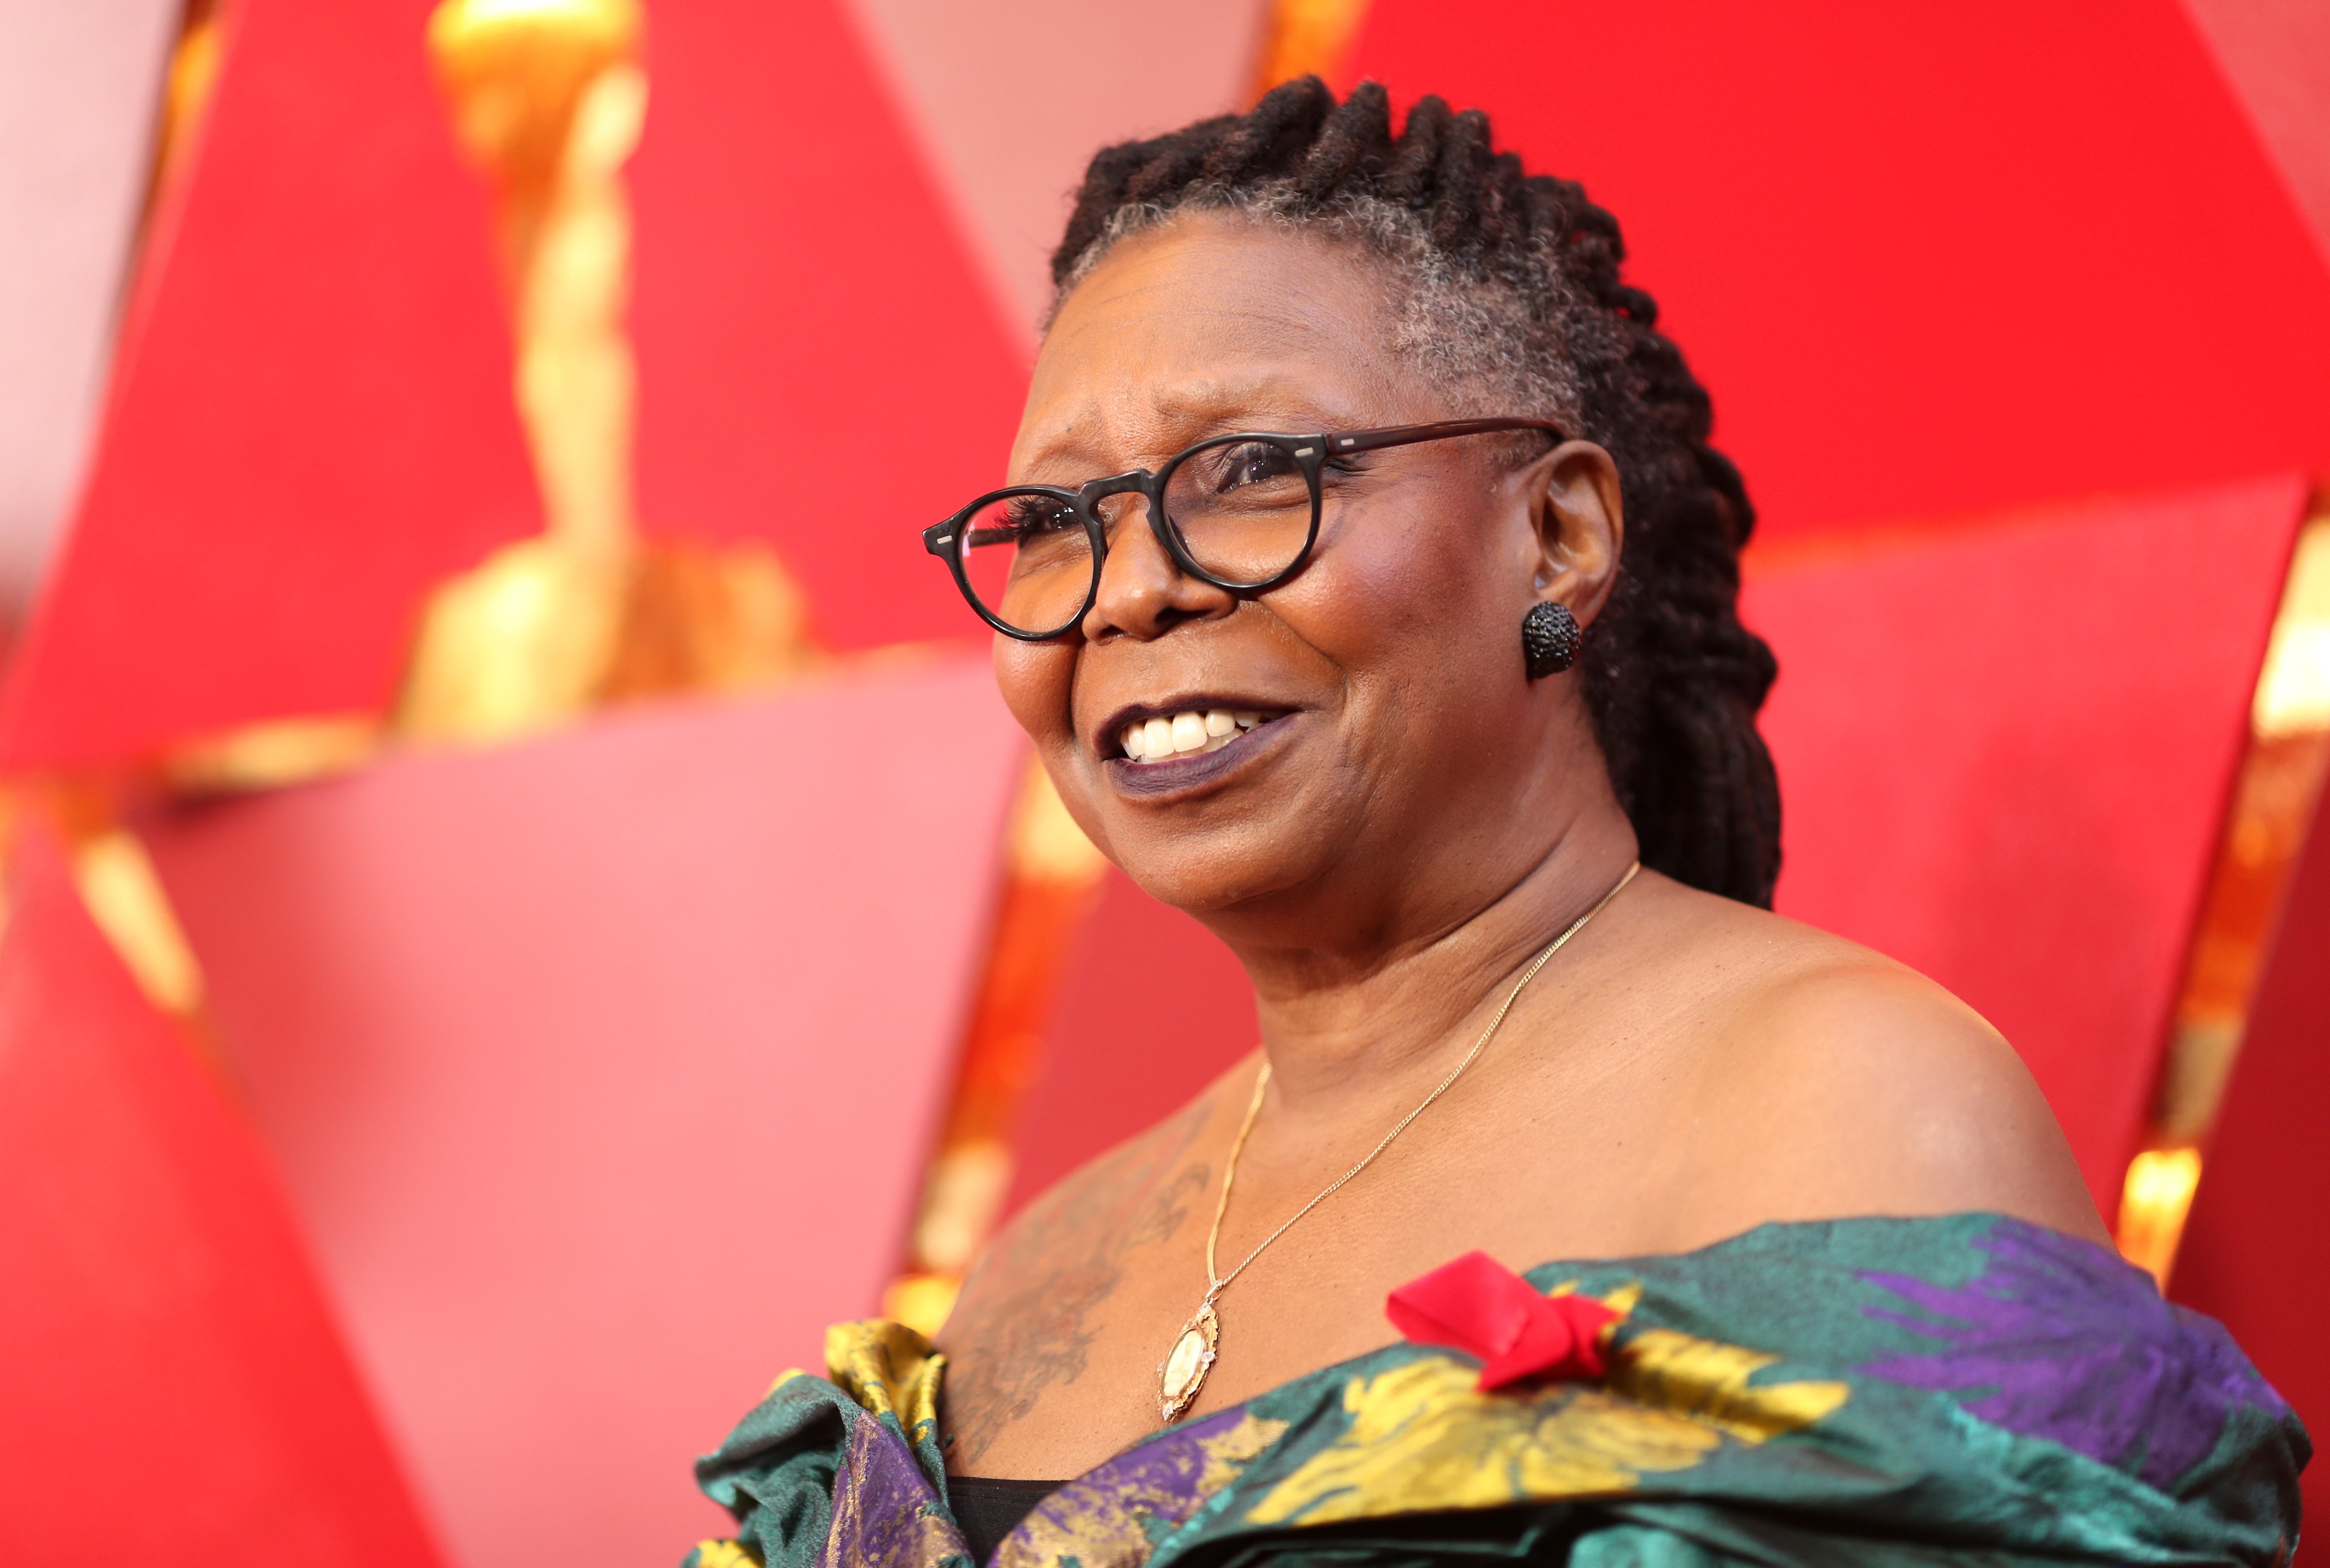 Whoopi Goldberg attends the 90th Annual Academy Awards at Hollywood & Highland Center on March 4, 2018 in Hollywood, California | Photo: Getty Images